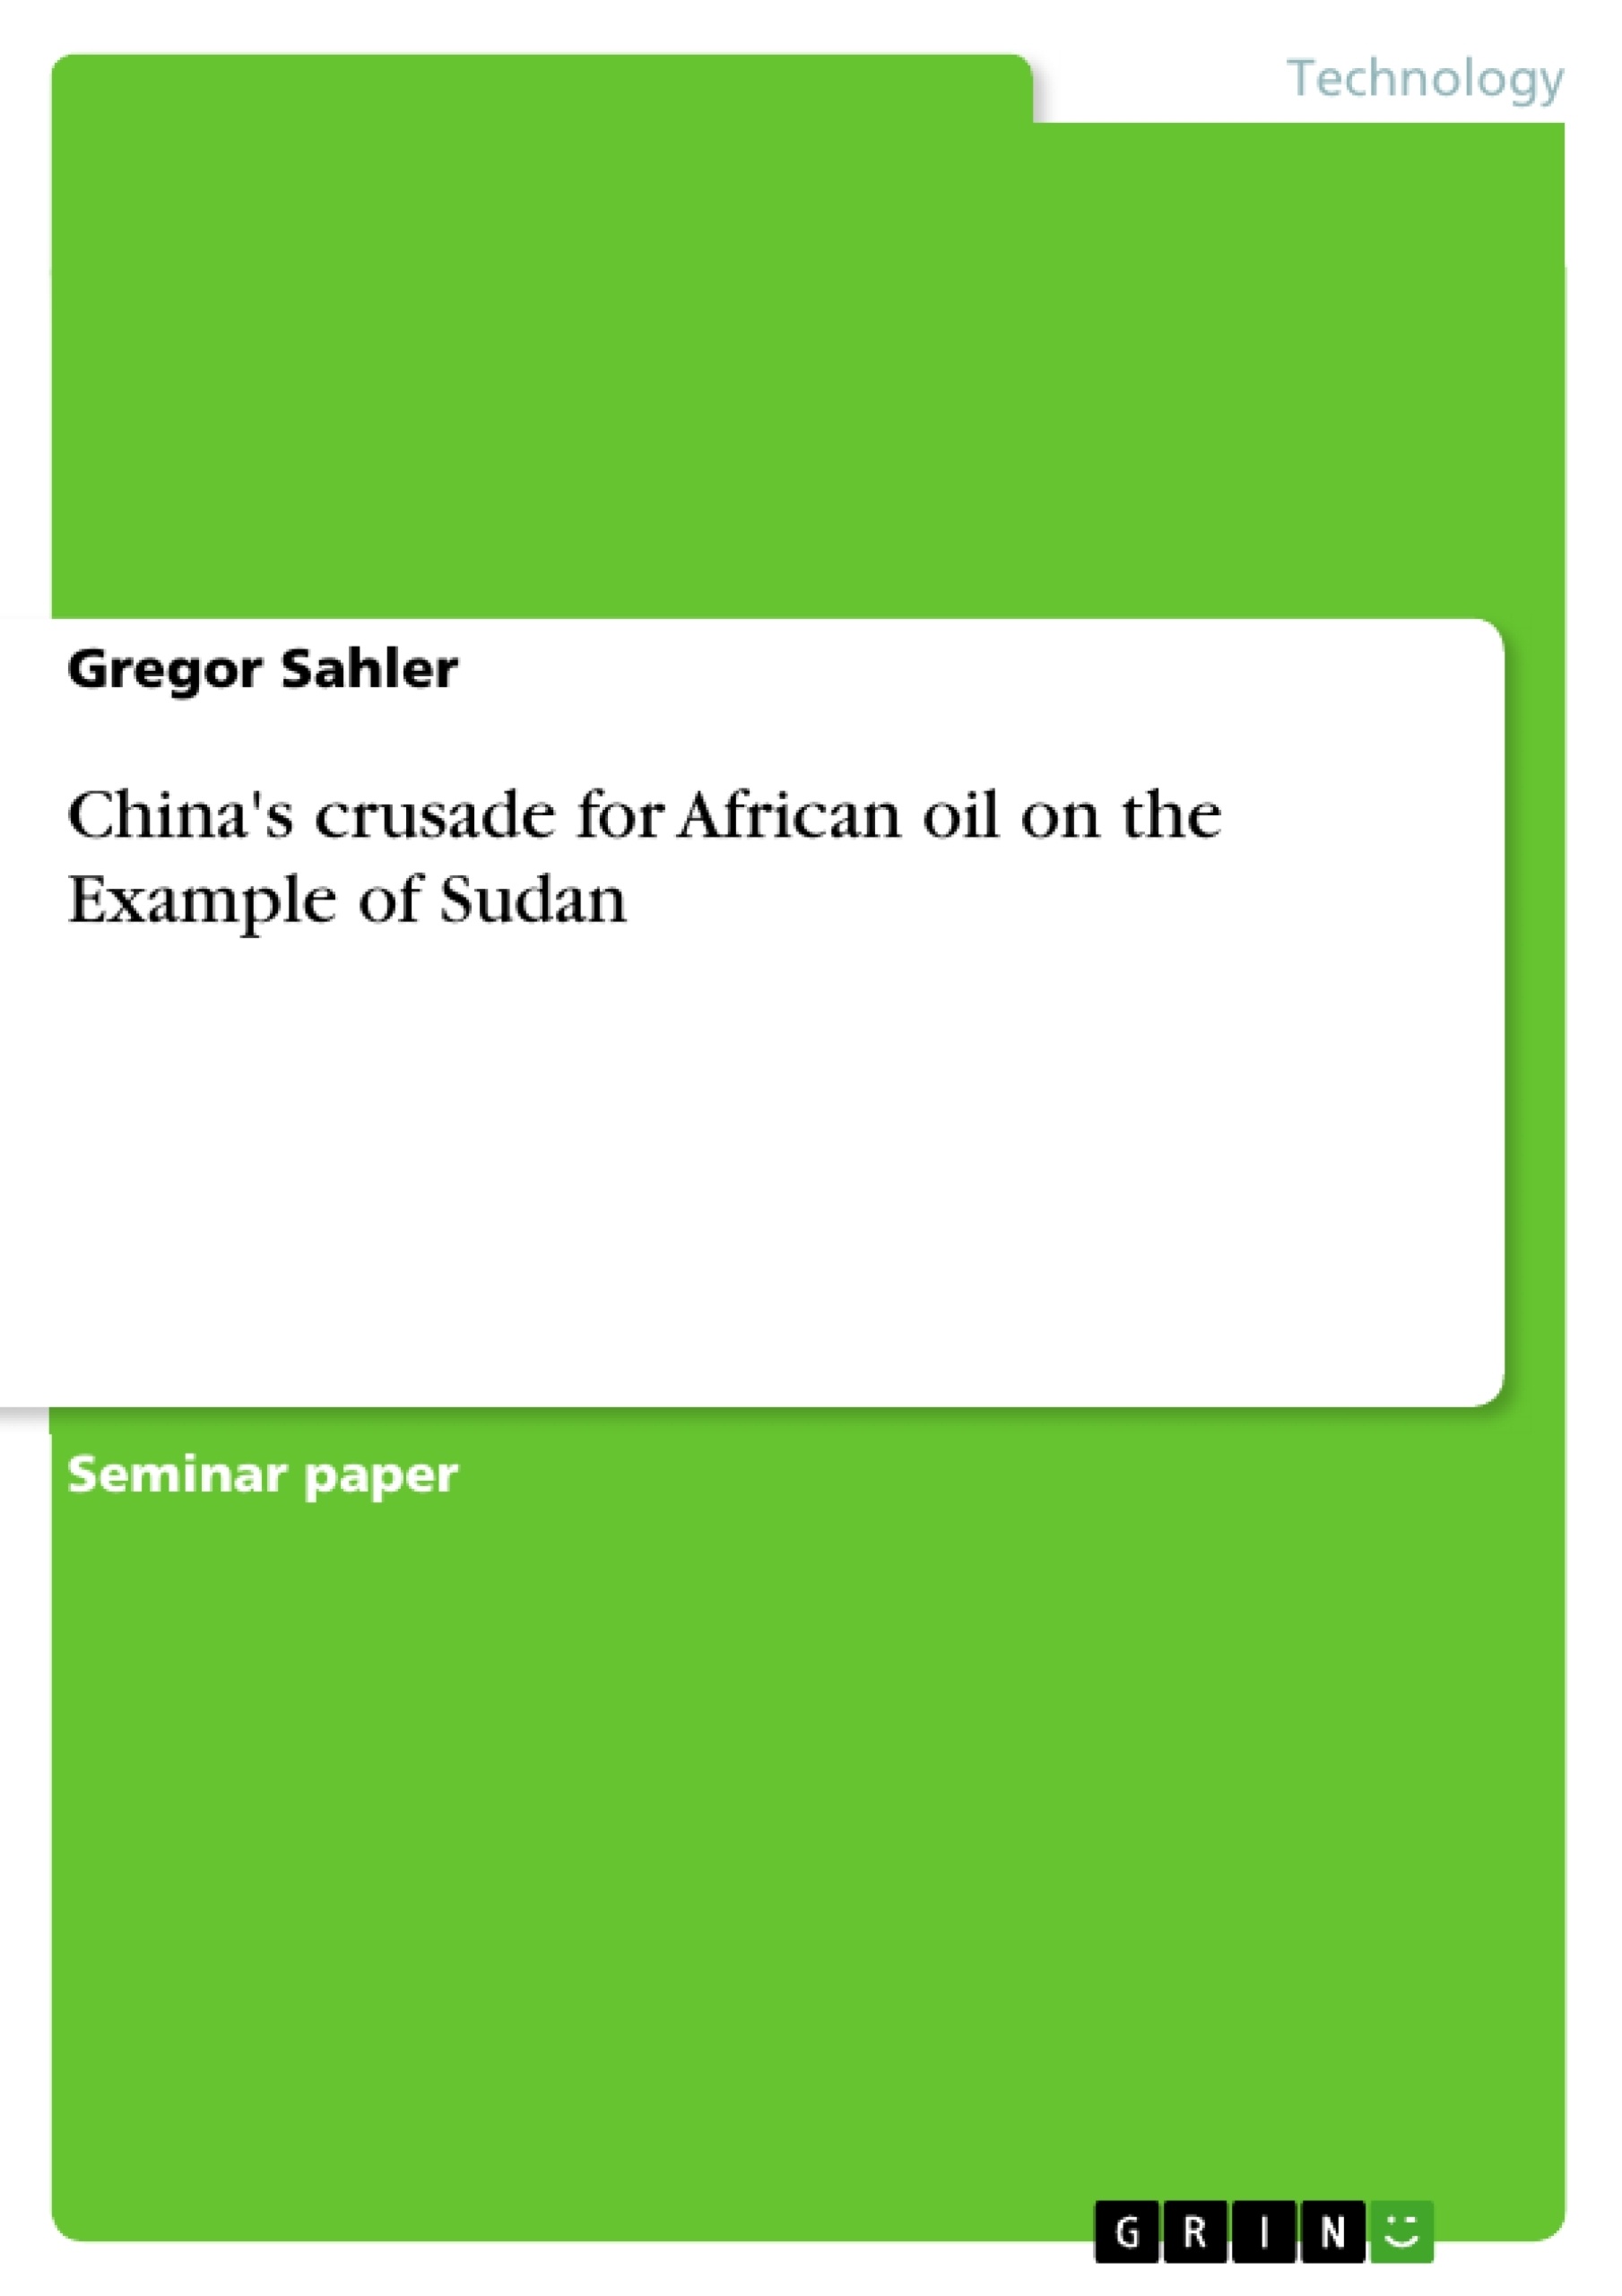 Titel: China's crusade for African oil on the Example of Sudan